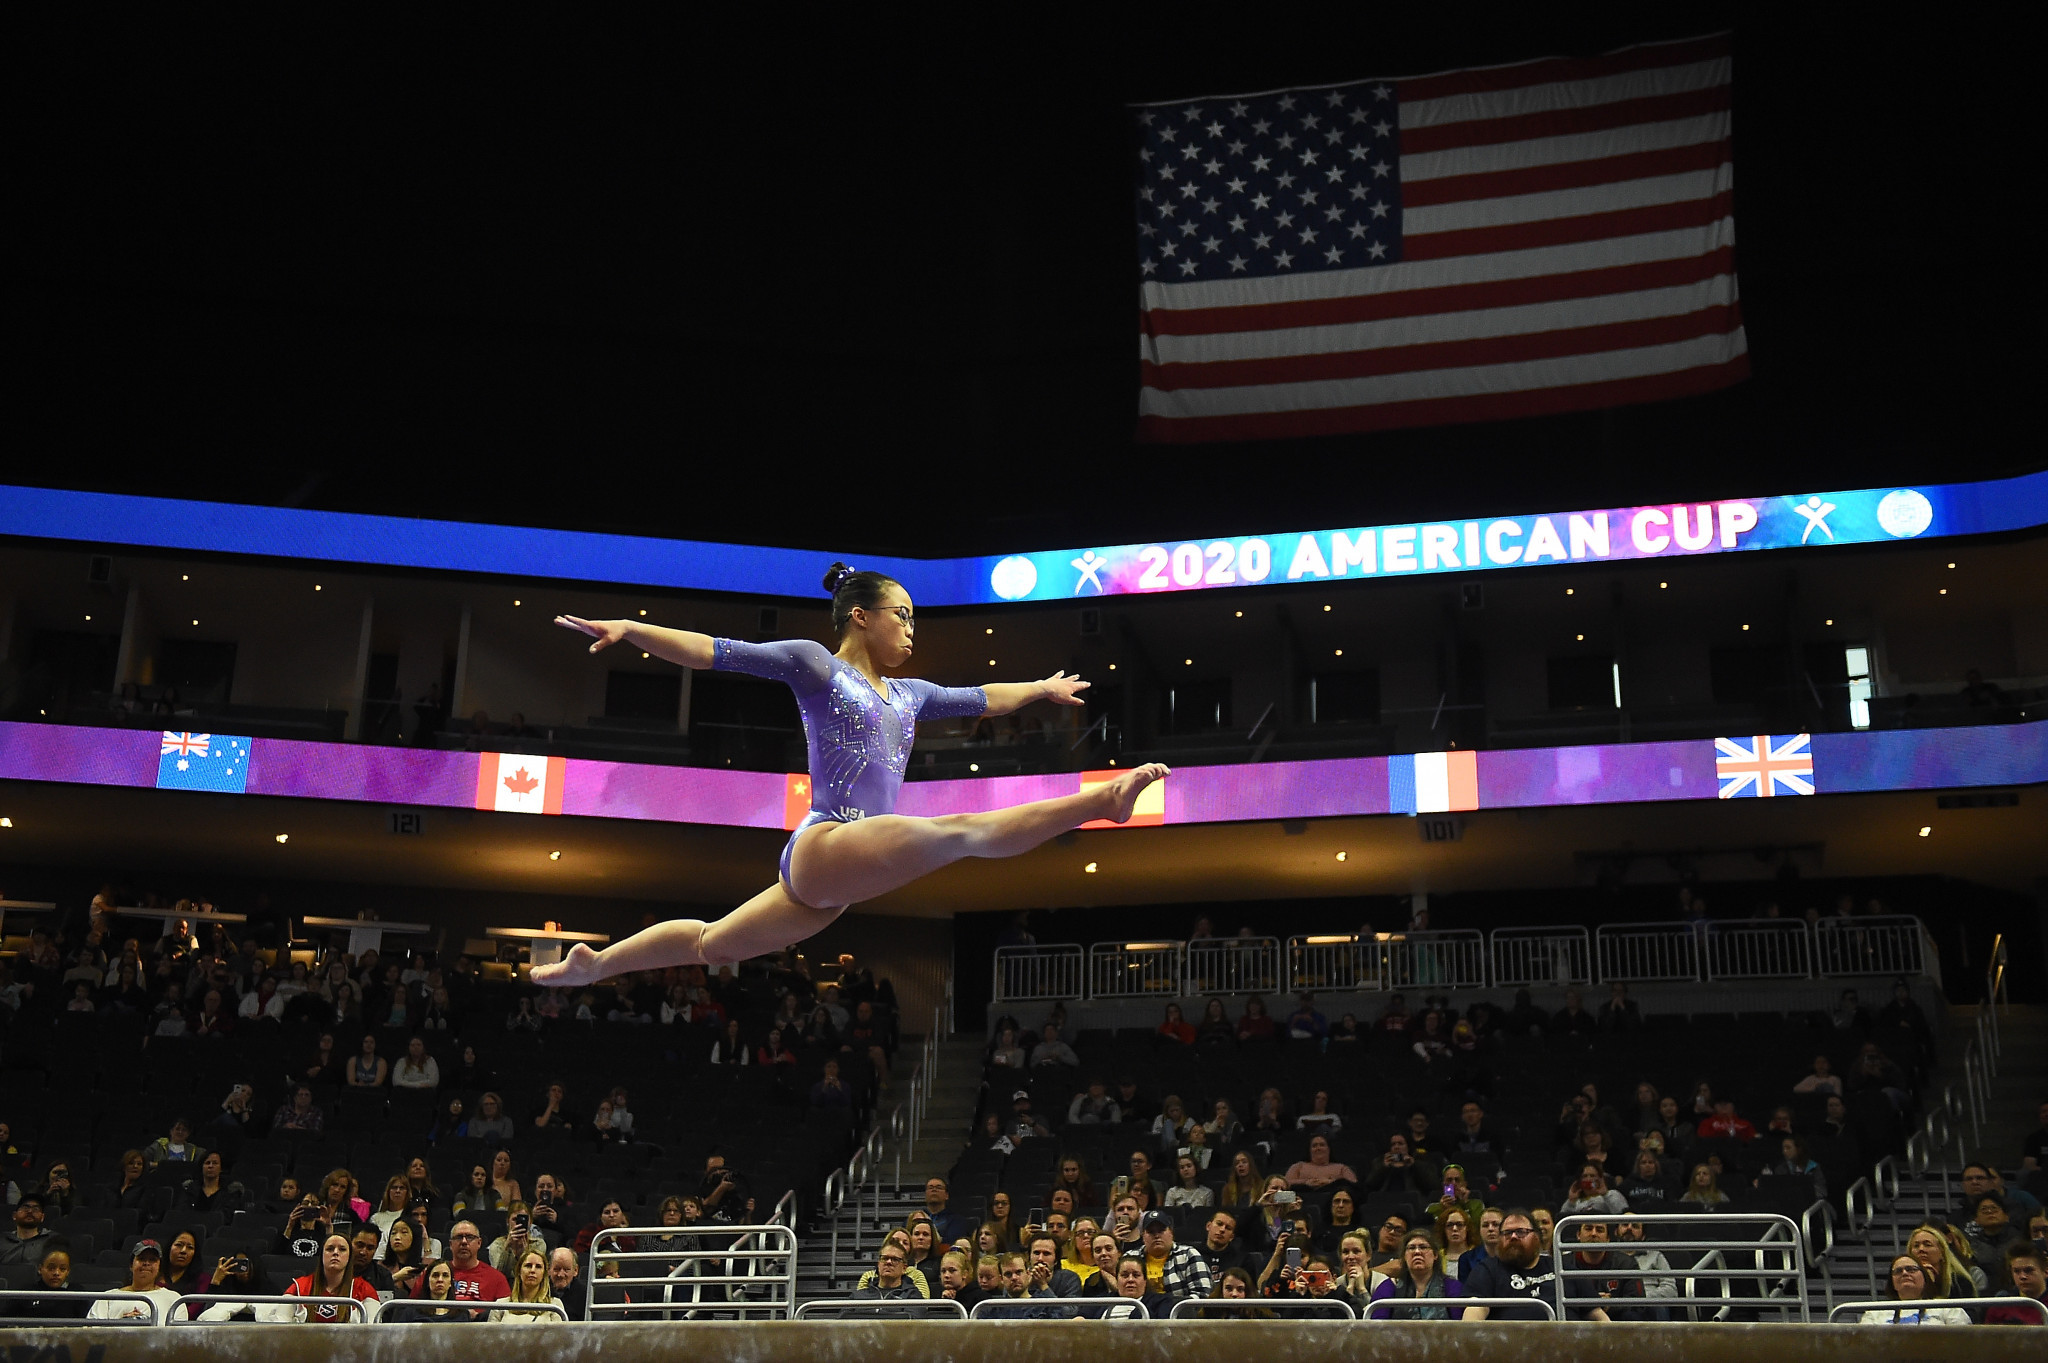 Morgan Hurd of the United States earned the women's all-around title at the American Cup ©Getty Images